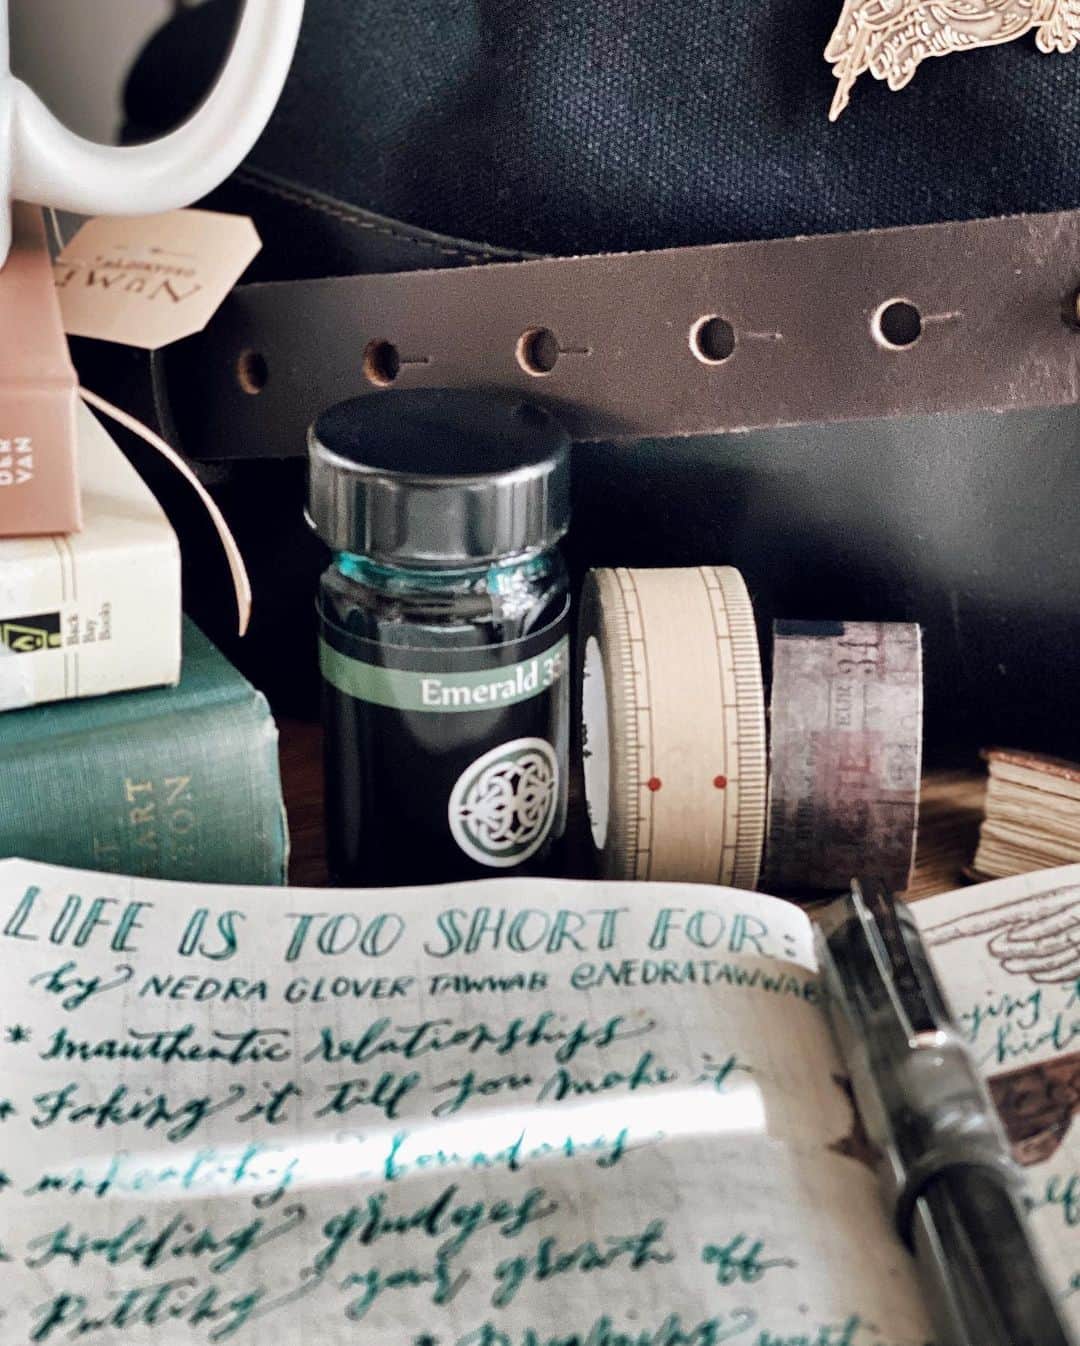 Catharine Mi-Sookさんのインスタグラム写真 - (Catharine Mi-SookInstagram)「Today’s self-care: a pause in the day for rooibos tea in my favorite mug, bullet-journaling a helpful list by @nedratawwab, making my creative nook beautiful for no other reason than it bringing me joy, affirming myself out loud with truth, and unpacking a fear and choosing to honor what is healthy for me instead of yielding to that fear. Step by step, step by step. . . Here is the list by @nedratawwab from her post earlier today that I penned in my weekly bullet journal — . . Life Is Too Short For: . * Inauthentic relationships * Faking it till you make it * Unhealthy boundaries * Holding grudges * Putting your growth off * Dreaming without creating goals * Second-guessing yourself * Trying to hide who you are to fit what others want you to be * Self-pity . “Be mindful of who you spend time with and how you spend your time.” -Nedra Glover Tawwab . . Do any of these resonate with you? Would you add anything to this list? This is my journal prompt for later — which of these are prominent in my life right now and what I might add to this list as well. What is something you can do today to take care of yourself? . . Joyful nook: Model 03 fountain pen with the steel extra-fine flex nib inked with Emerald 357, all by @franklinchristoph. Vagabond Notebook & Fortis Slingbag co-designed between @franklinchristoph and myself - link in bio. Universal Planner TN Insert @soumkine. Drafter Antique Textiles Pouch @pegandawl. Stickers & LCN brass pin @kiroku.de. Winter 2020 issue of @genic_mag (I have a feature in it). . . #selfcareroutine #bulletjournallove #journaling #franklinchristoph #fountainpens #fountainpenink #vagabondnotebook #fortisslingbag #whatsinmybag #travelersnotebook #soumkine #bulletjournalinspiration #bujoinspiration #bujoideas #bujospread #bulletjournalideas #stationerylover #pegandawl #thedailywriting #petalsandprops #loveforanalogue #genic_mag #ofquietmoments #hyggelife #bookaesthetic #teaandseasons #plannercommunity #journallove」1月29日 2時17分 - catharinemisook